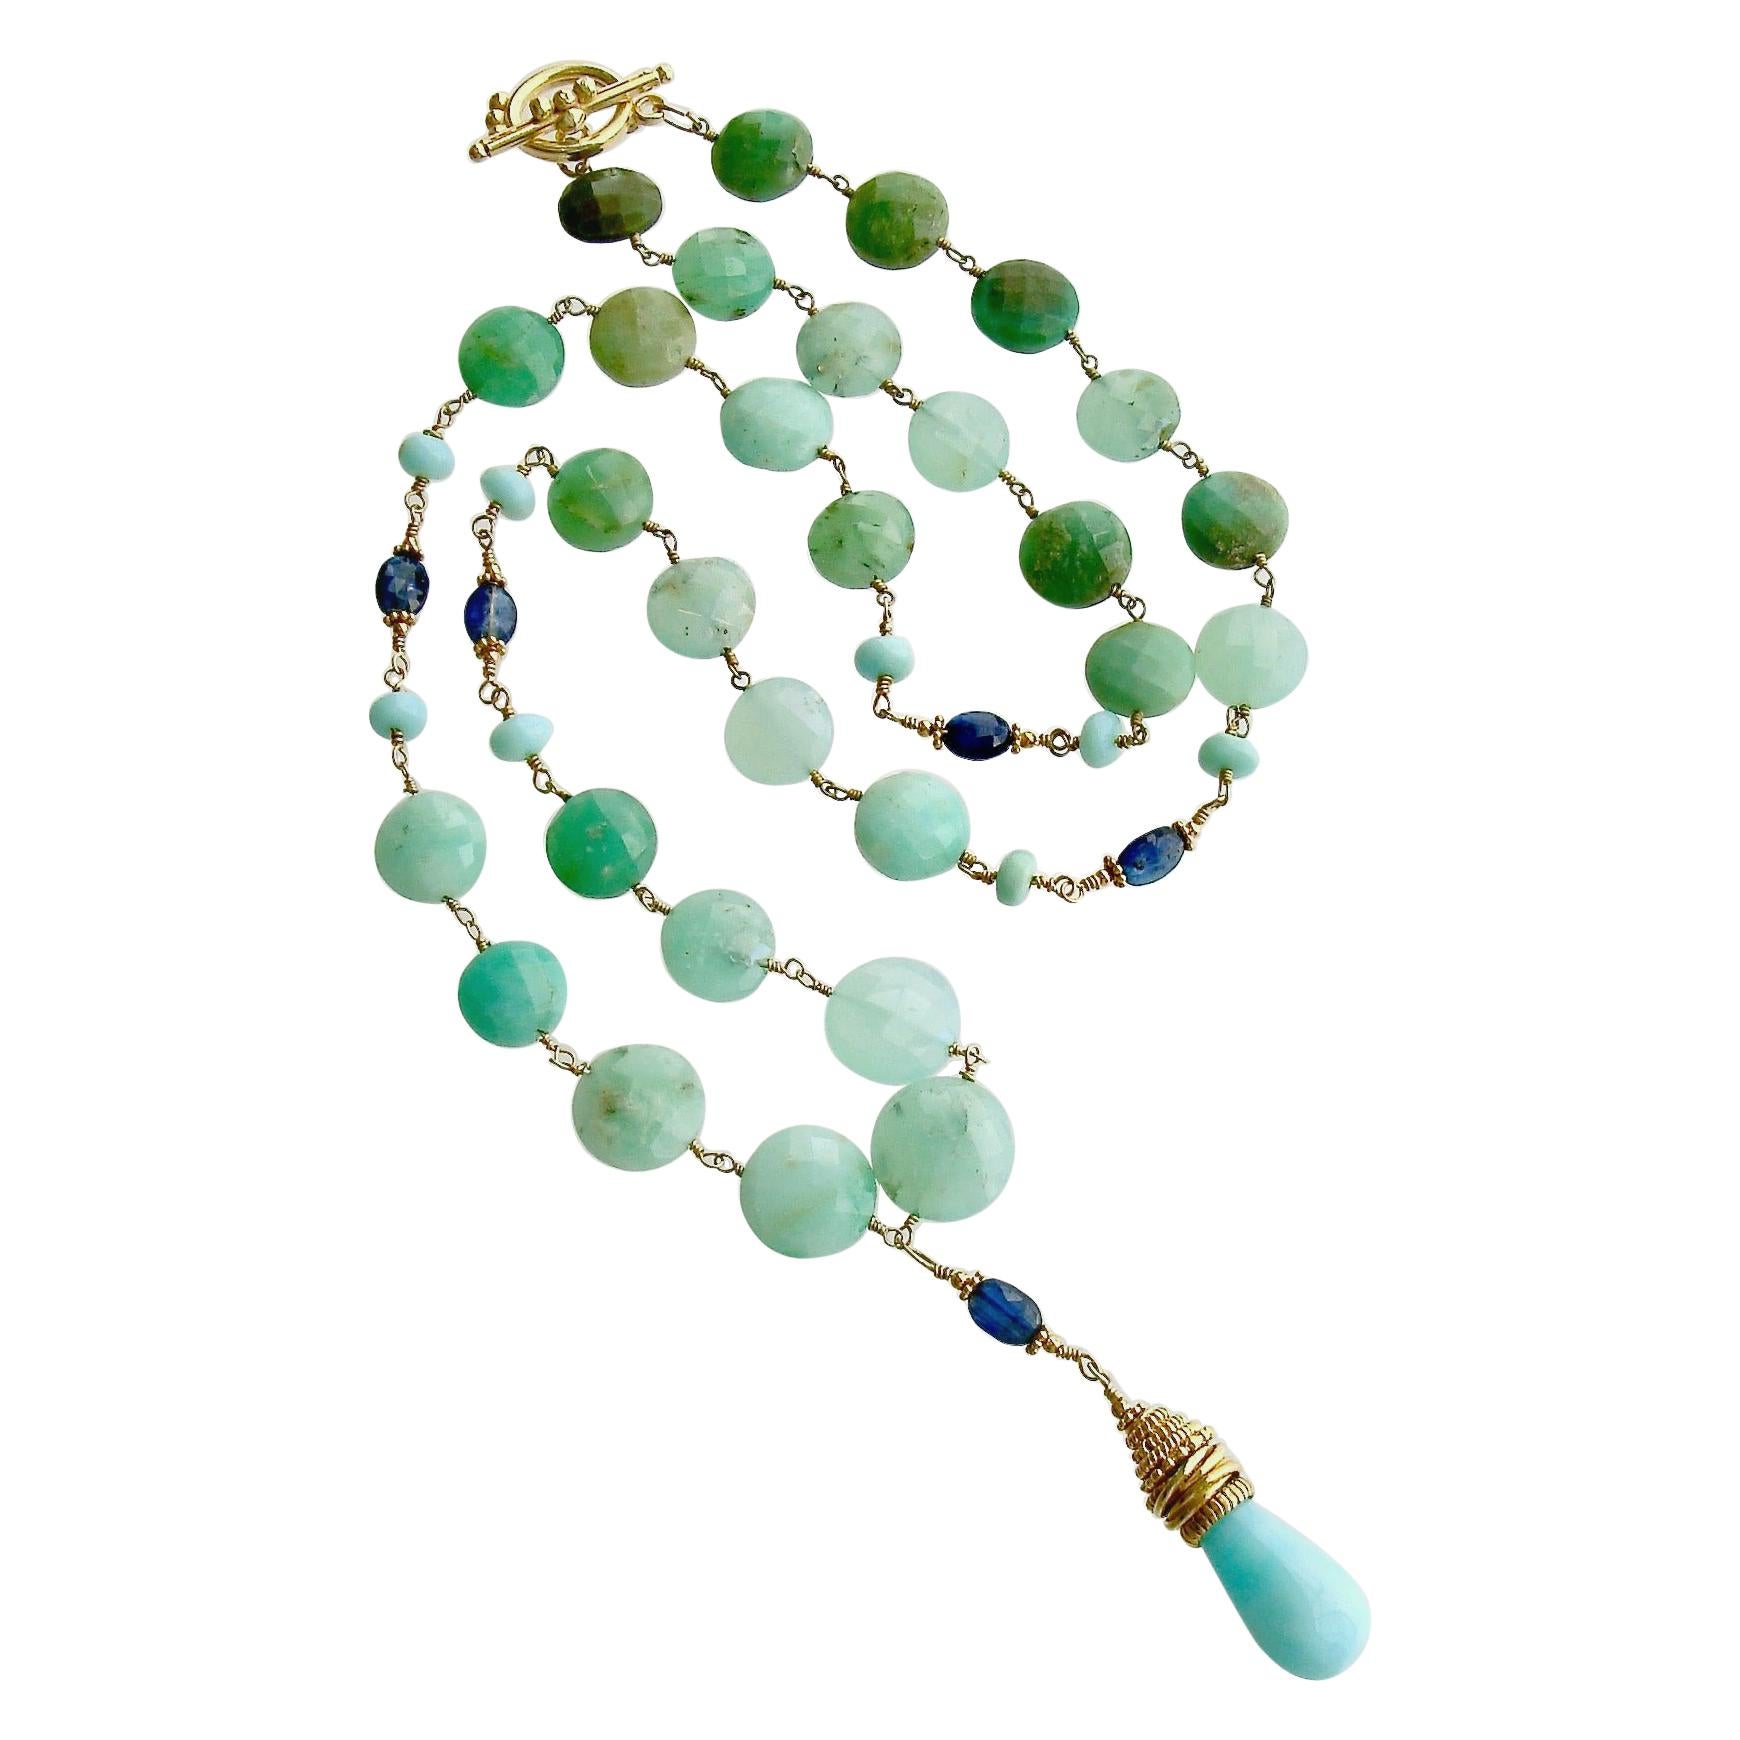 Chrysoprase Coins Peruvian Blue Opal Kyanite Necklace, Molly II Necklace